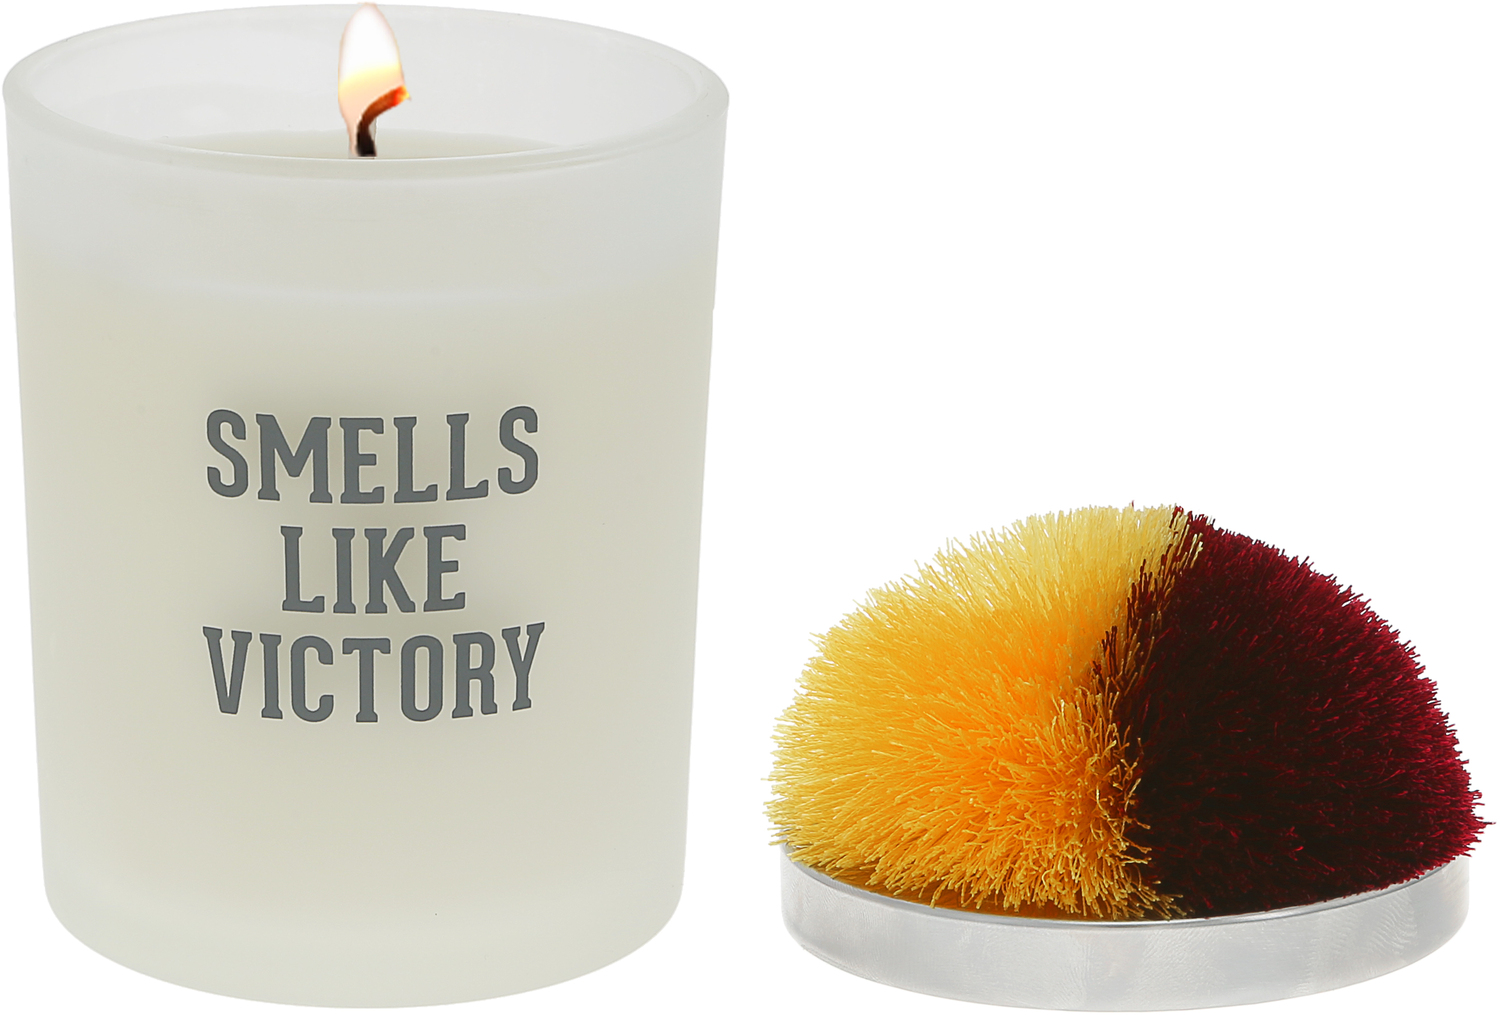 Victory - Maroon & Yellow by Repre-Scent - Victory - Maroon & Yellow - 5.5 oz - 100% Soy Wax Candle with Pom Pom Lid
Scent: Tranquility